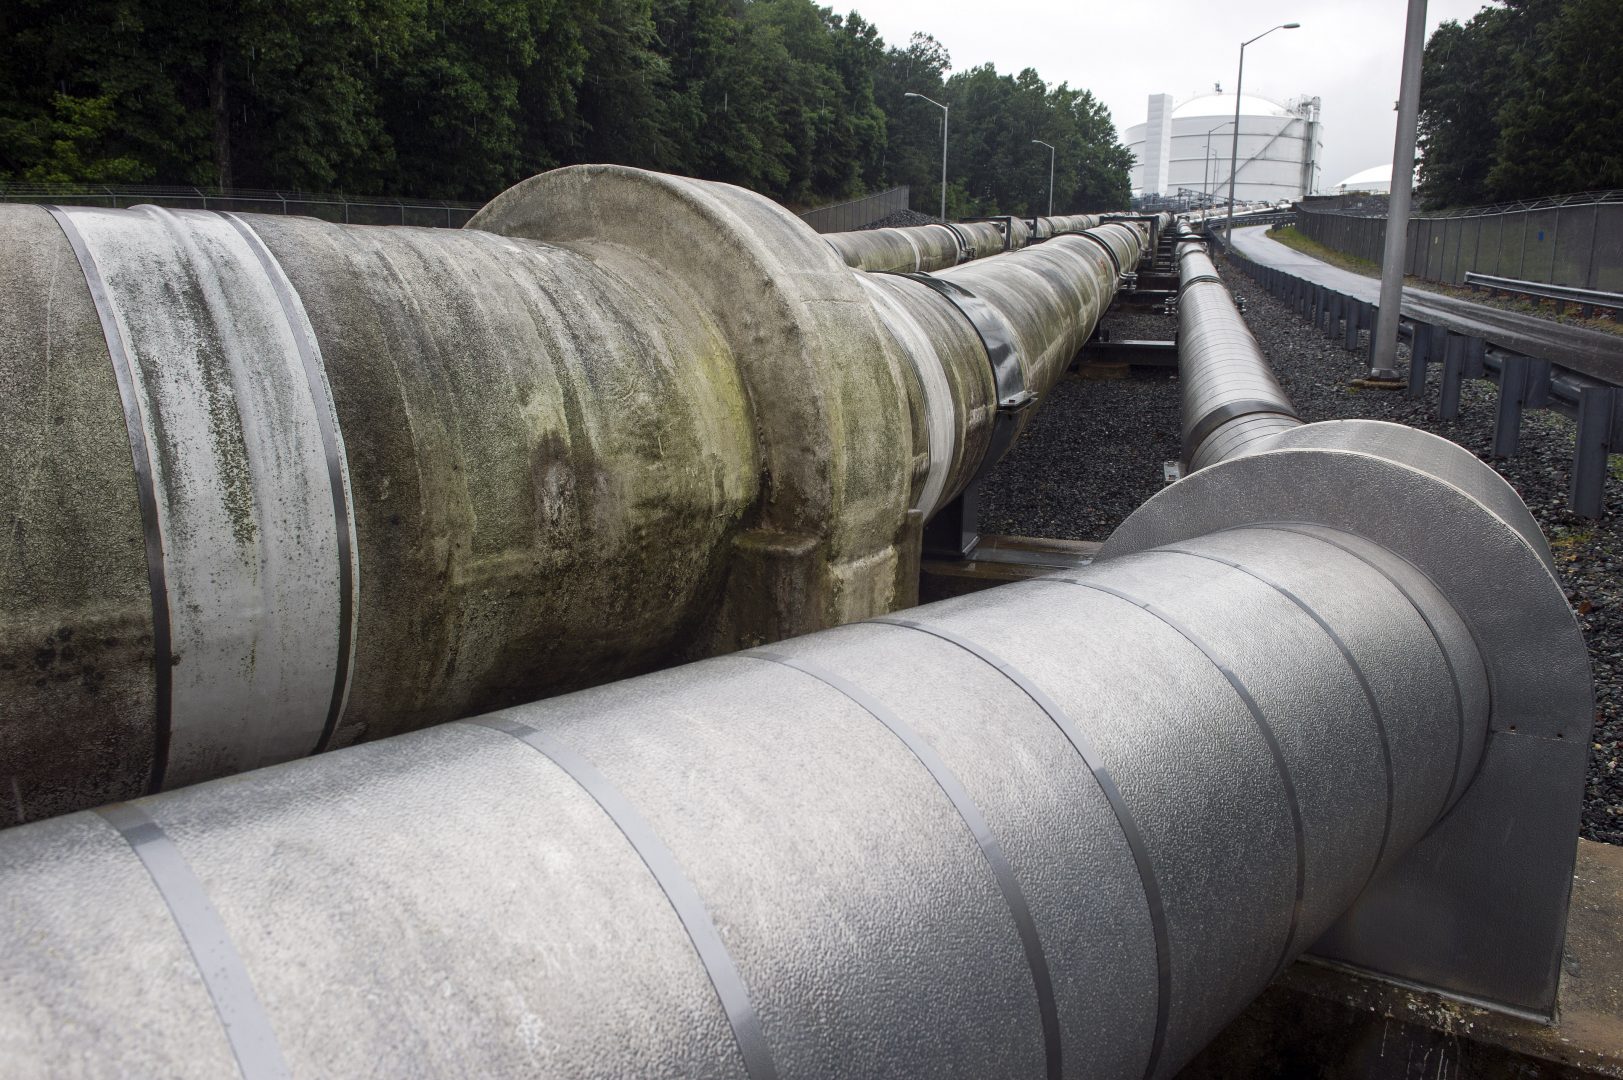 Transfer pipes carry liquified natural gas to and from a holding tank, seen in background, at Dominion Energy's Cove Point LNG Terminal in Lusby, Md., Thursday, June 12, 2014. 